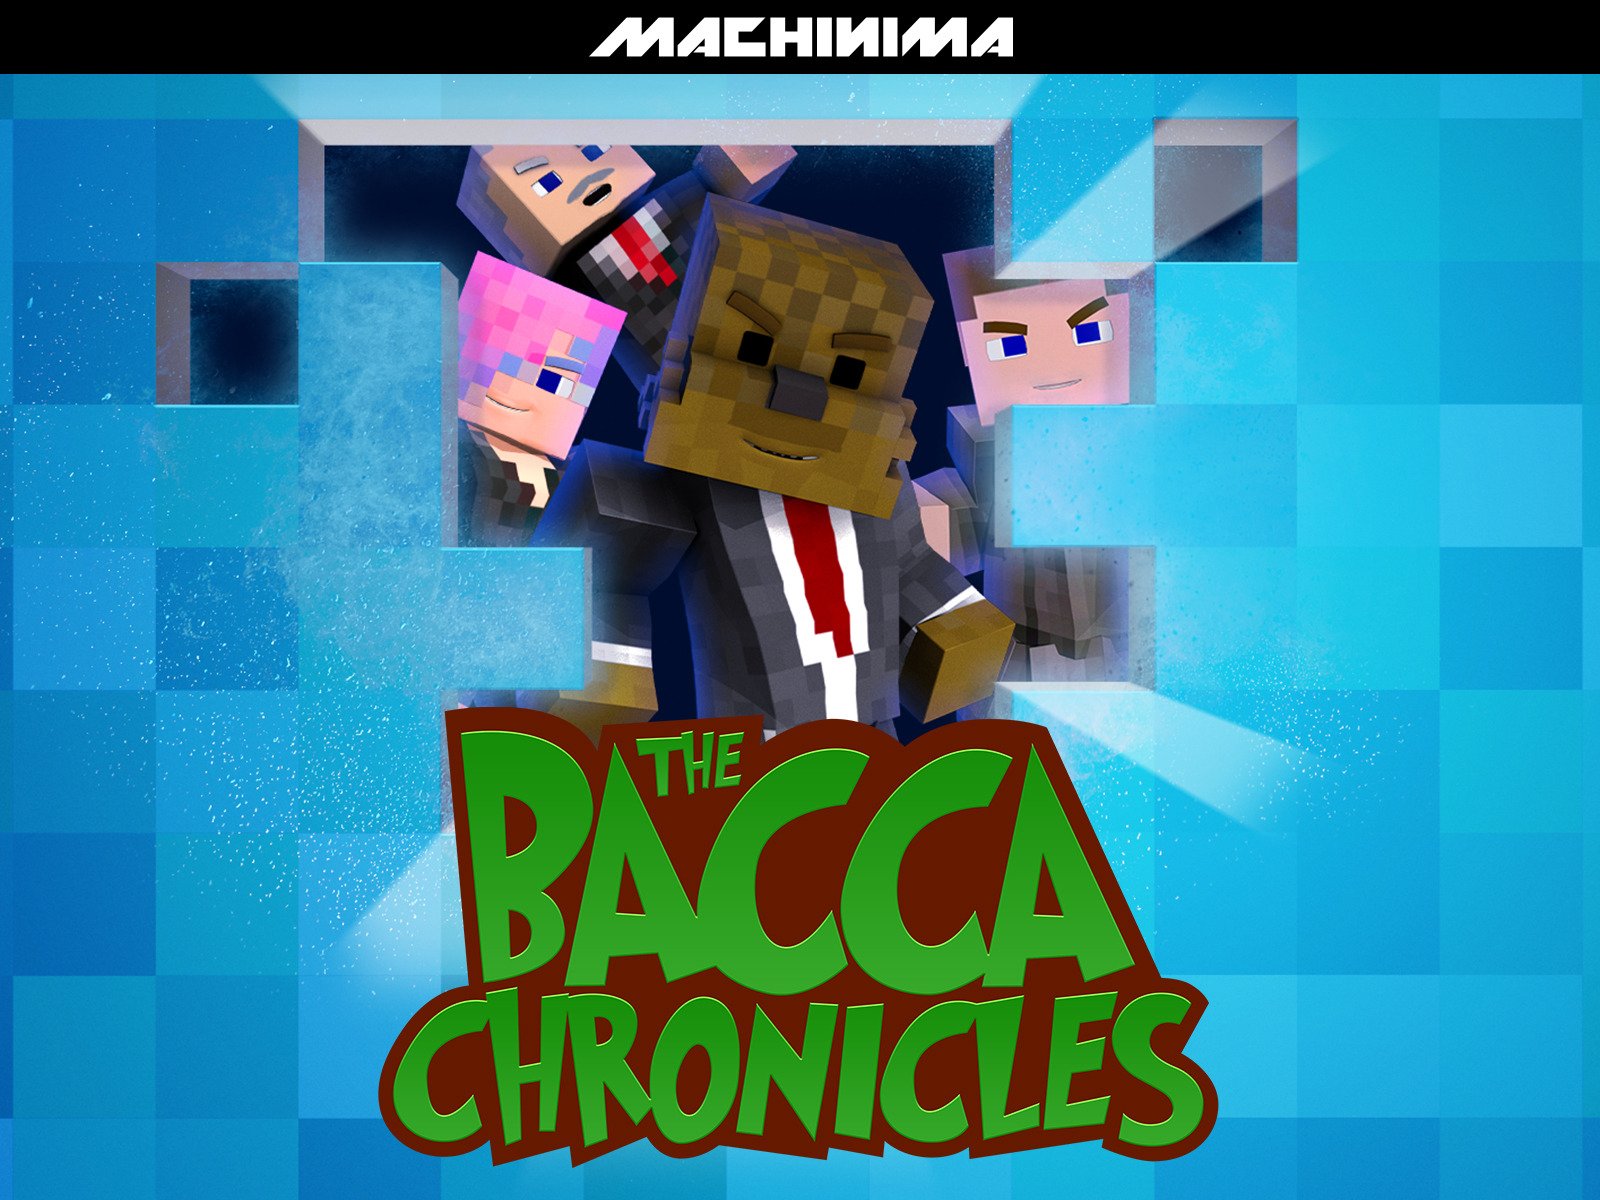 Watch The Bacca Chronicles Prime Video